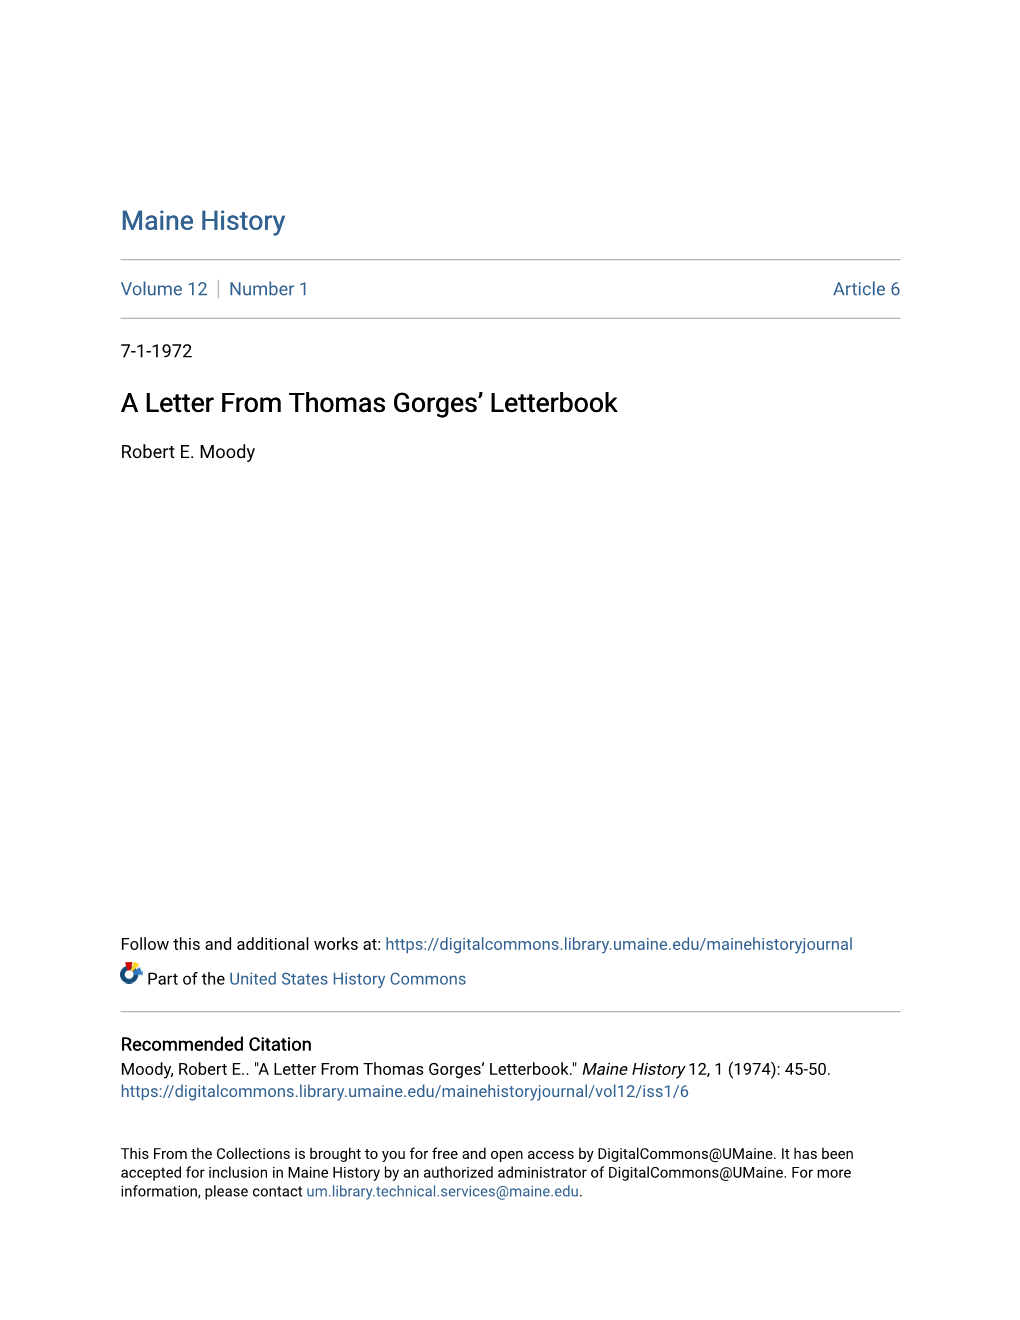 A Letter from Thomas Gorges' Letterbook